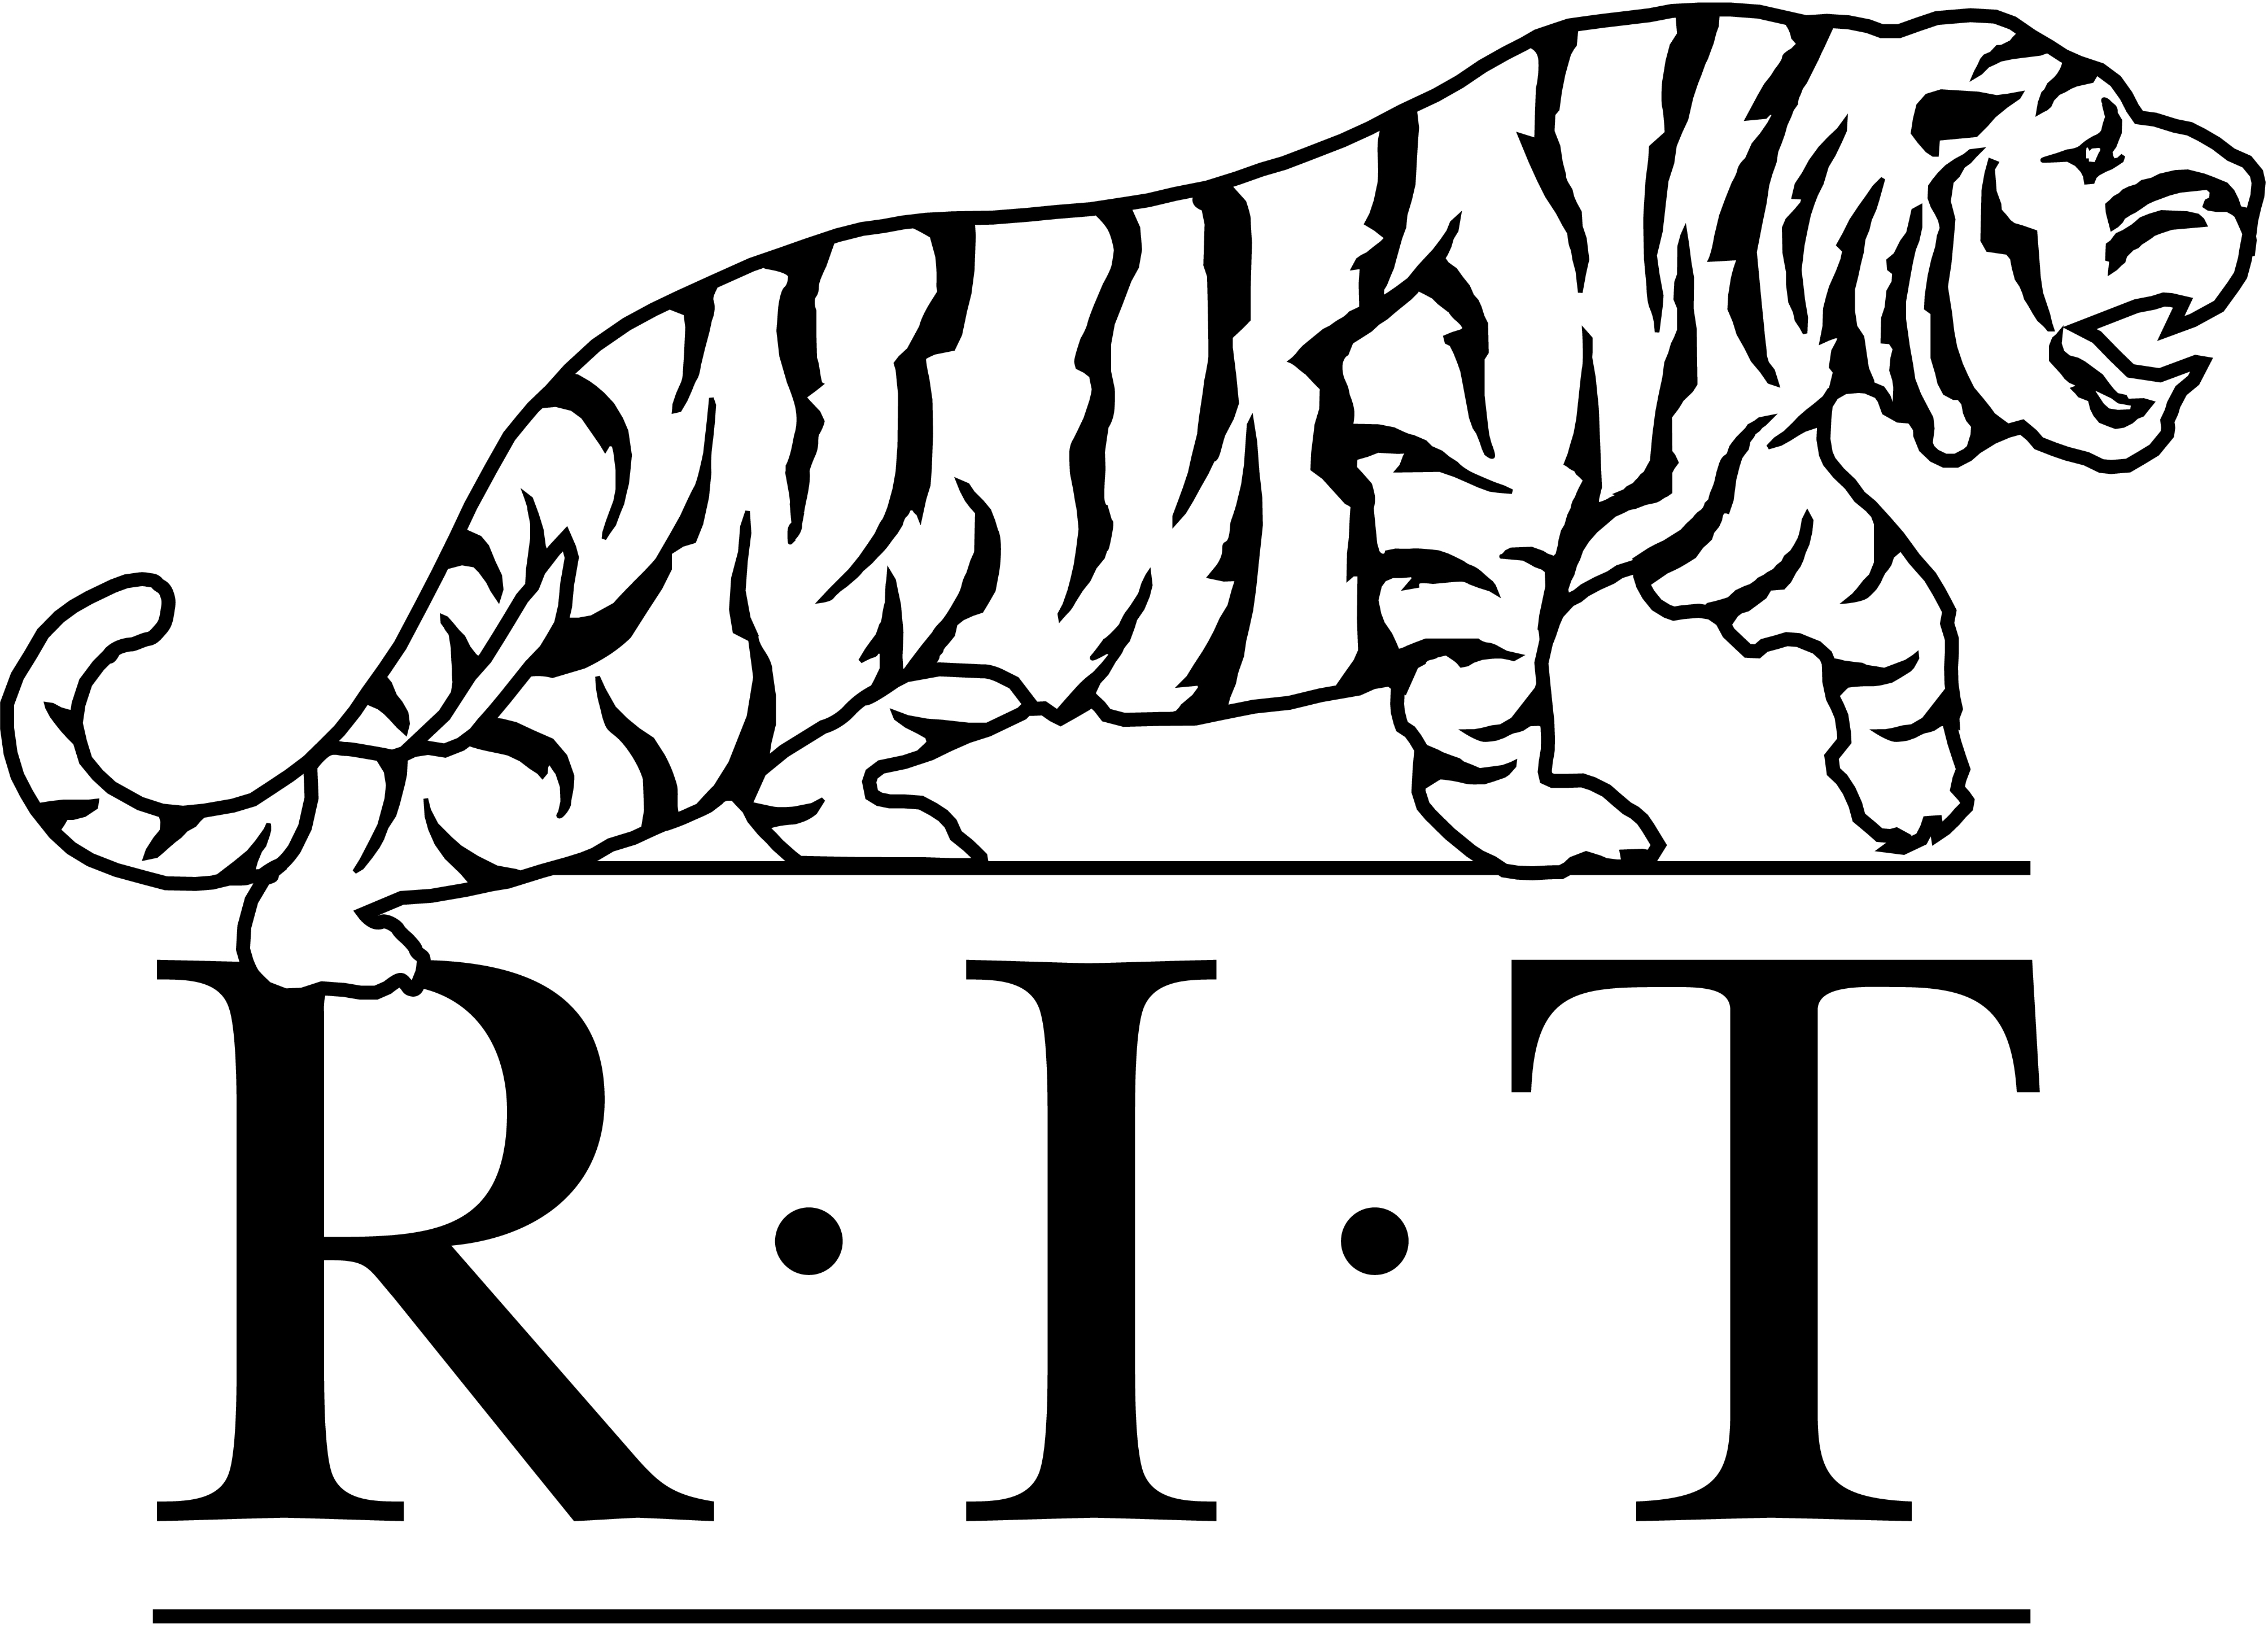 Approved RIT Logos | University Publications